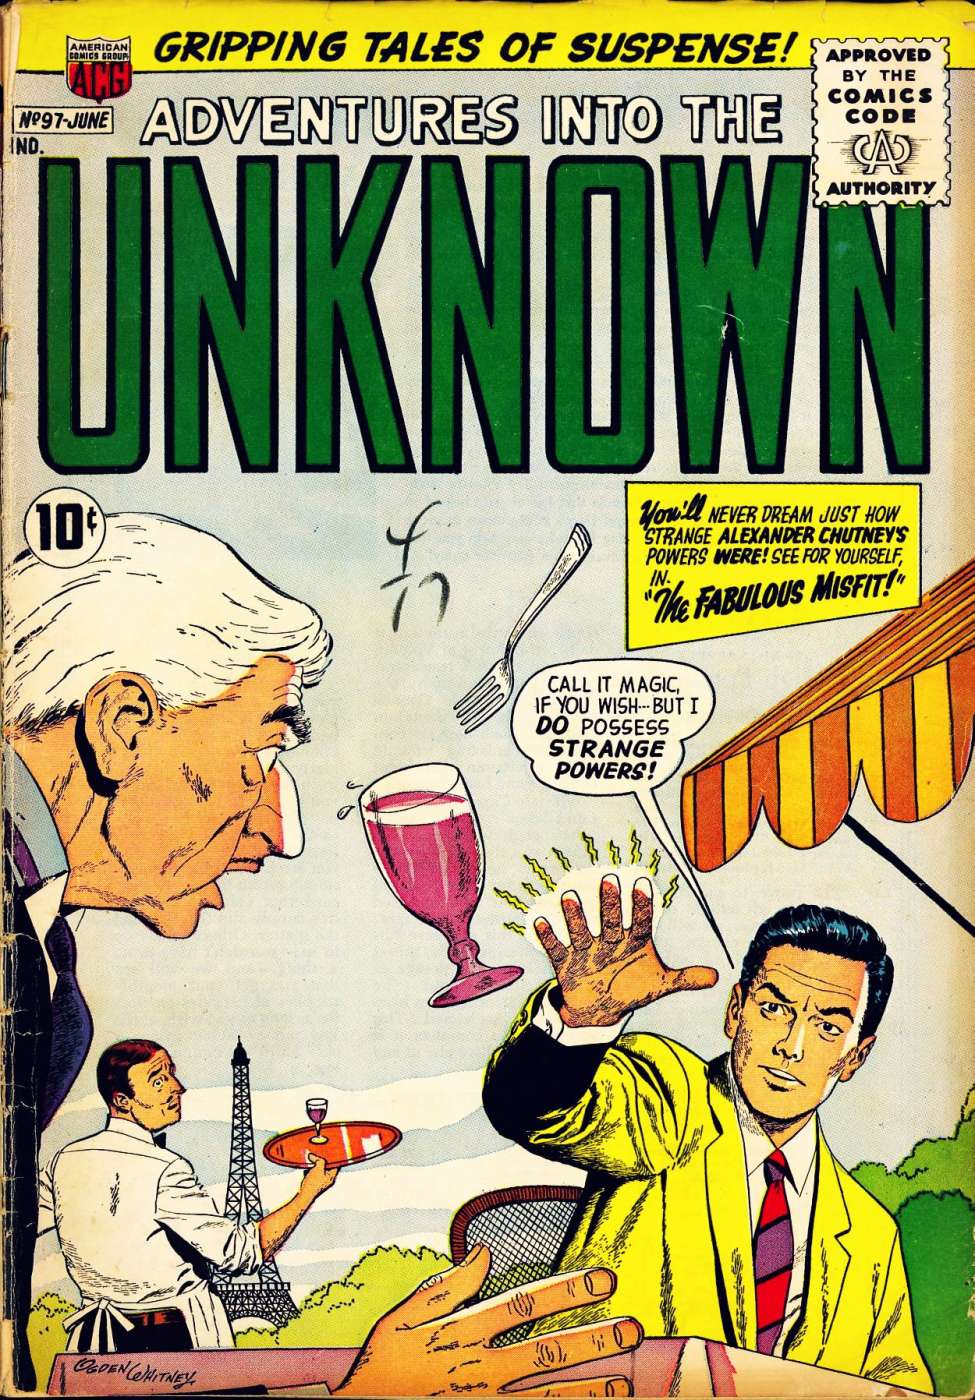 Book Cover For Adventures into the Unknown 97